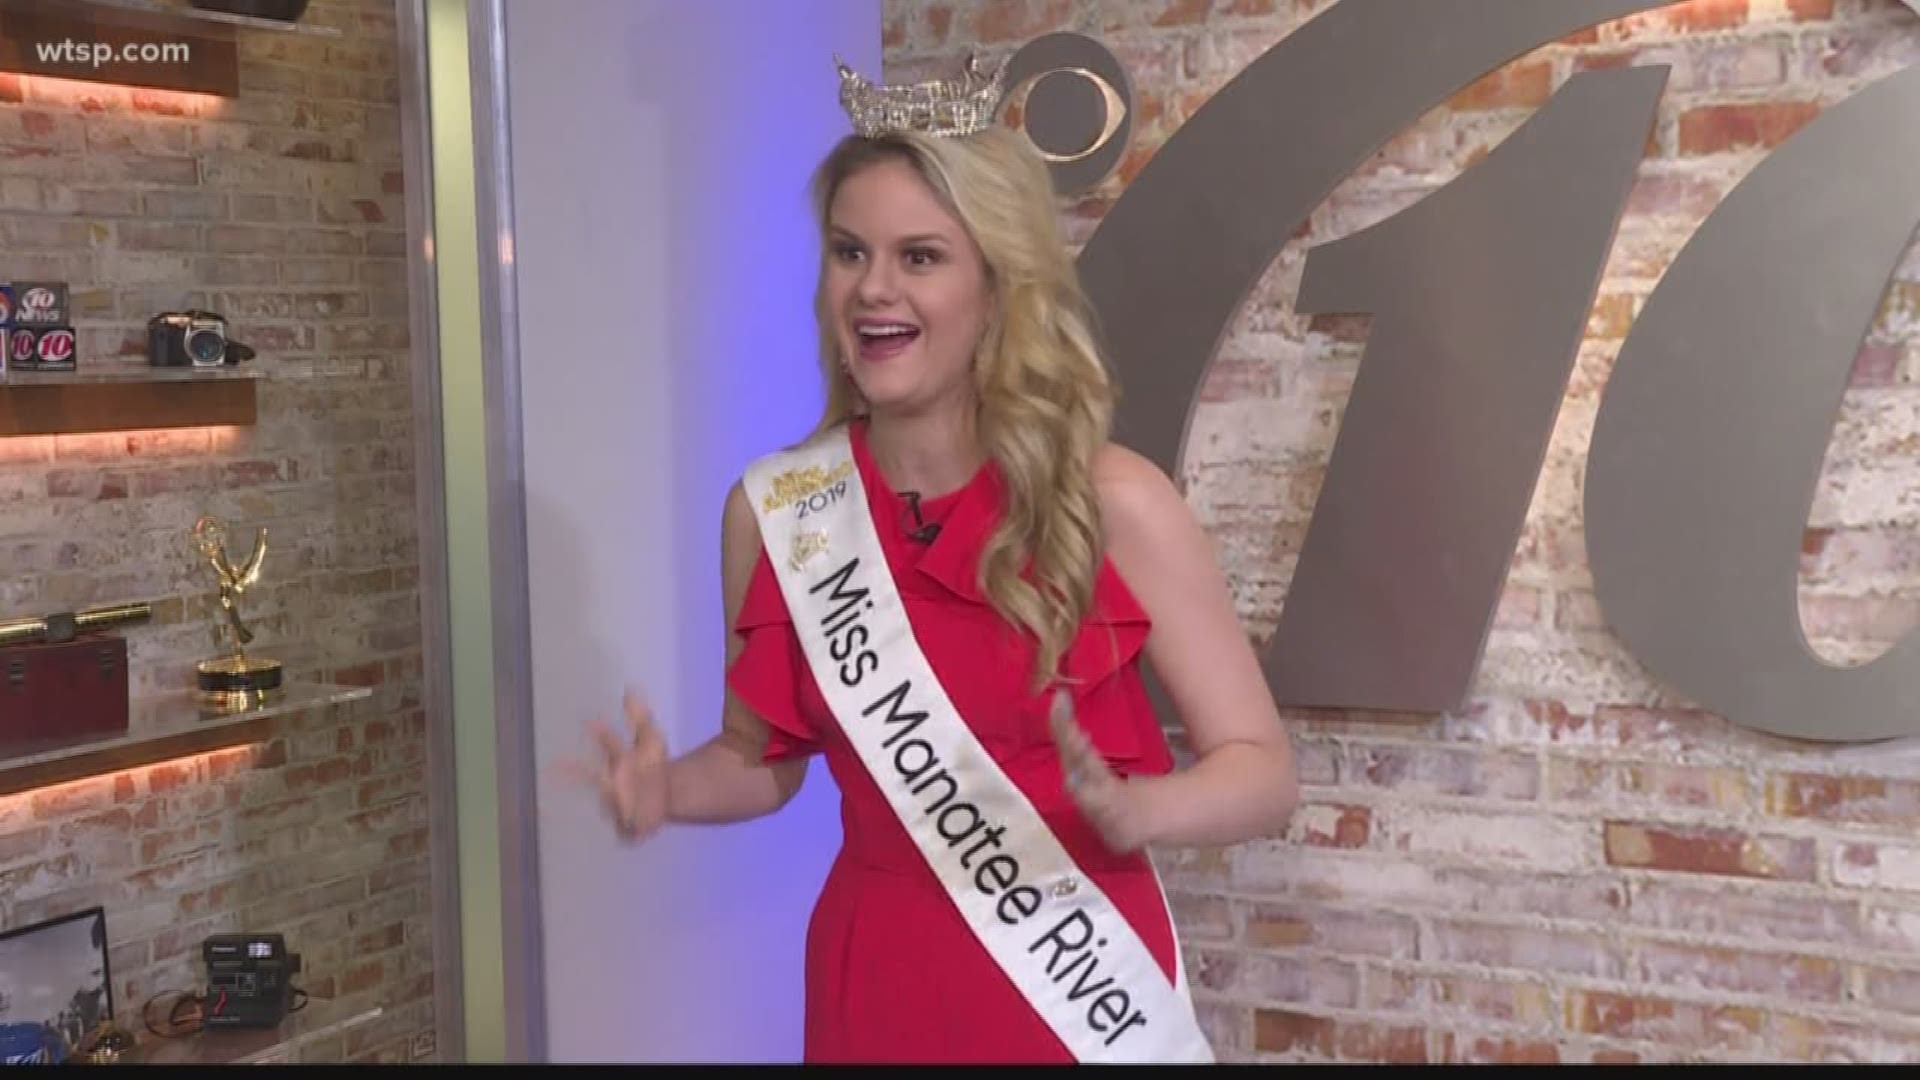 A University of South Florida student is set to be the first woman with autism to compete in the Miss Florida pageant.

Rachel Barcellona will represent Manatee River in the pageant later this month in Lakeland.

According to a blog post from the Els for Autism Foundation, Barcellona was Miss Florida International 2016 and National American Miss Florida for 2018. The post's author said she's considered a "real role model" in her community.